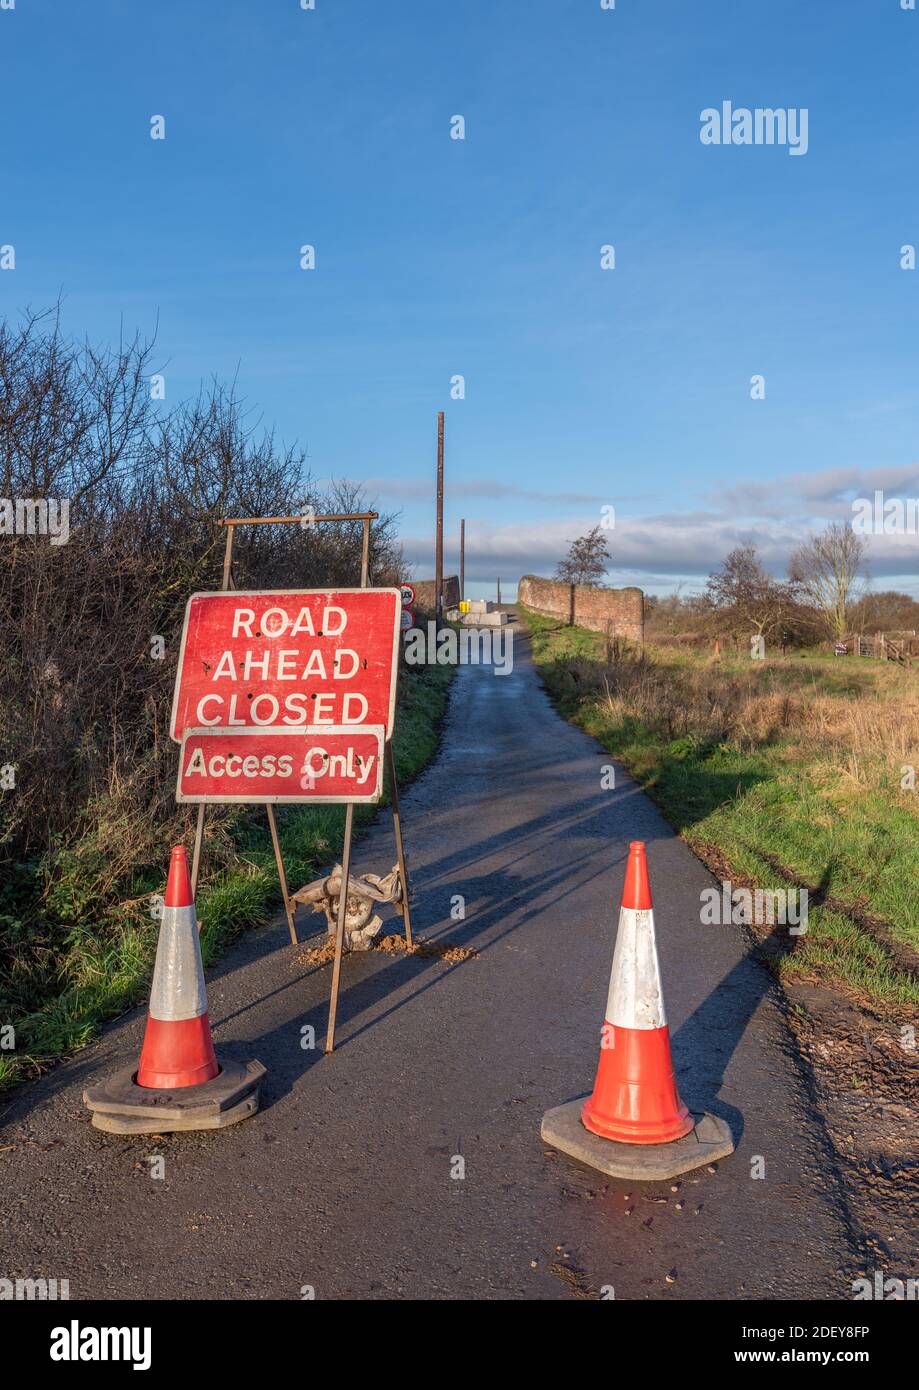 Road ahead closed sign and 2 red and white traffic cones on approach to a closed bridge. Stock Photo